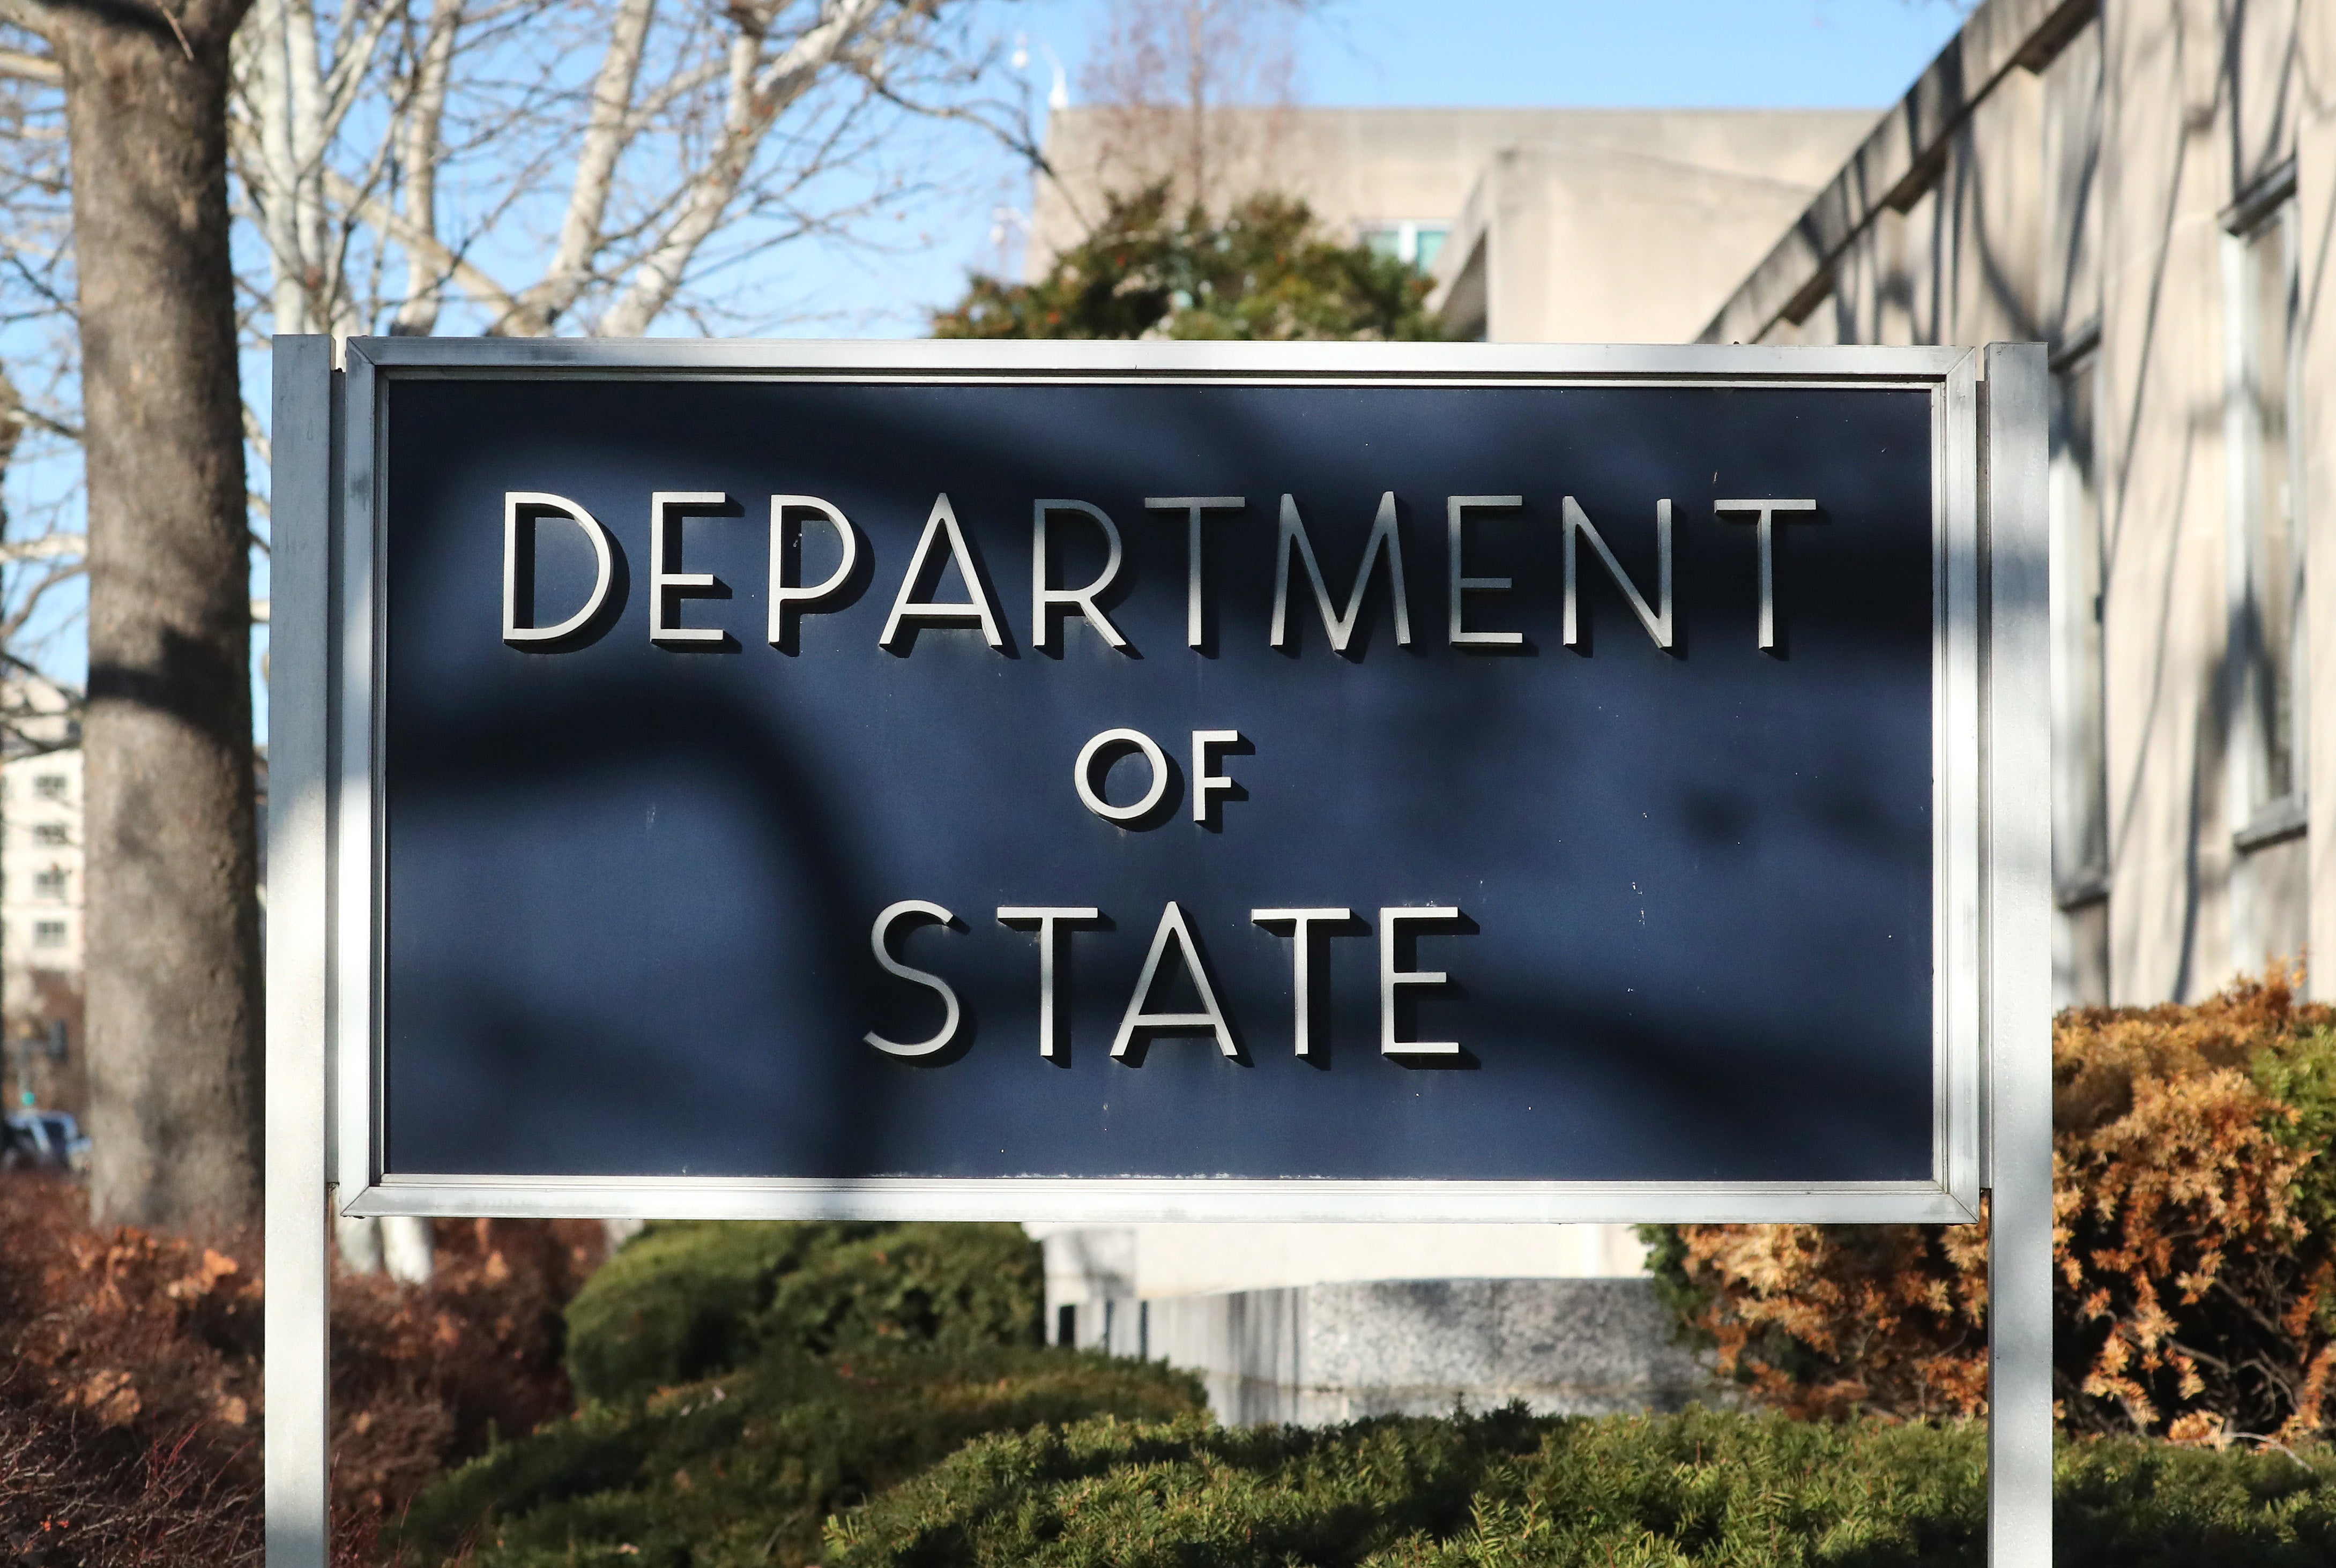 Computer networks at the US State Department and other federal agencies were hacked